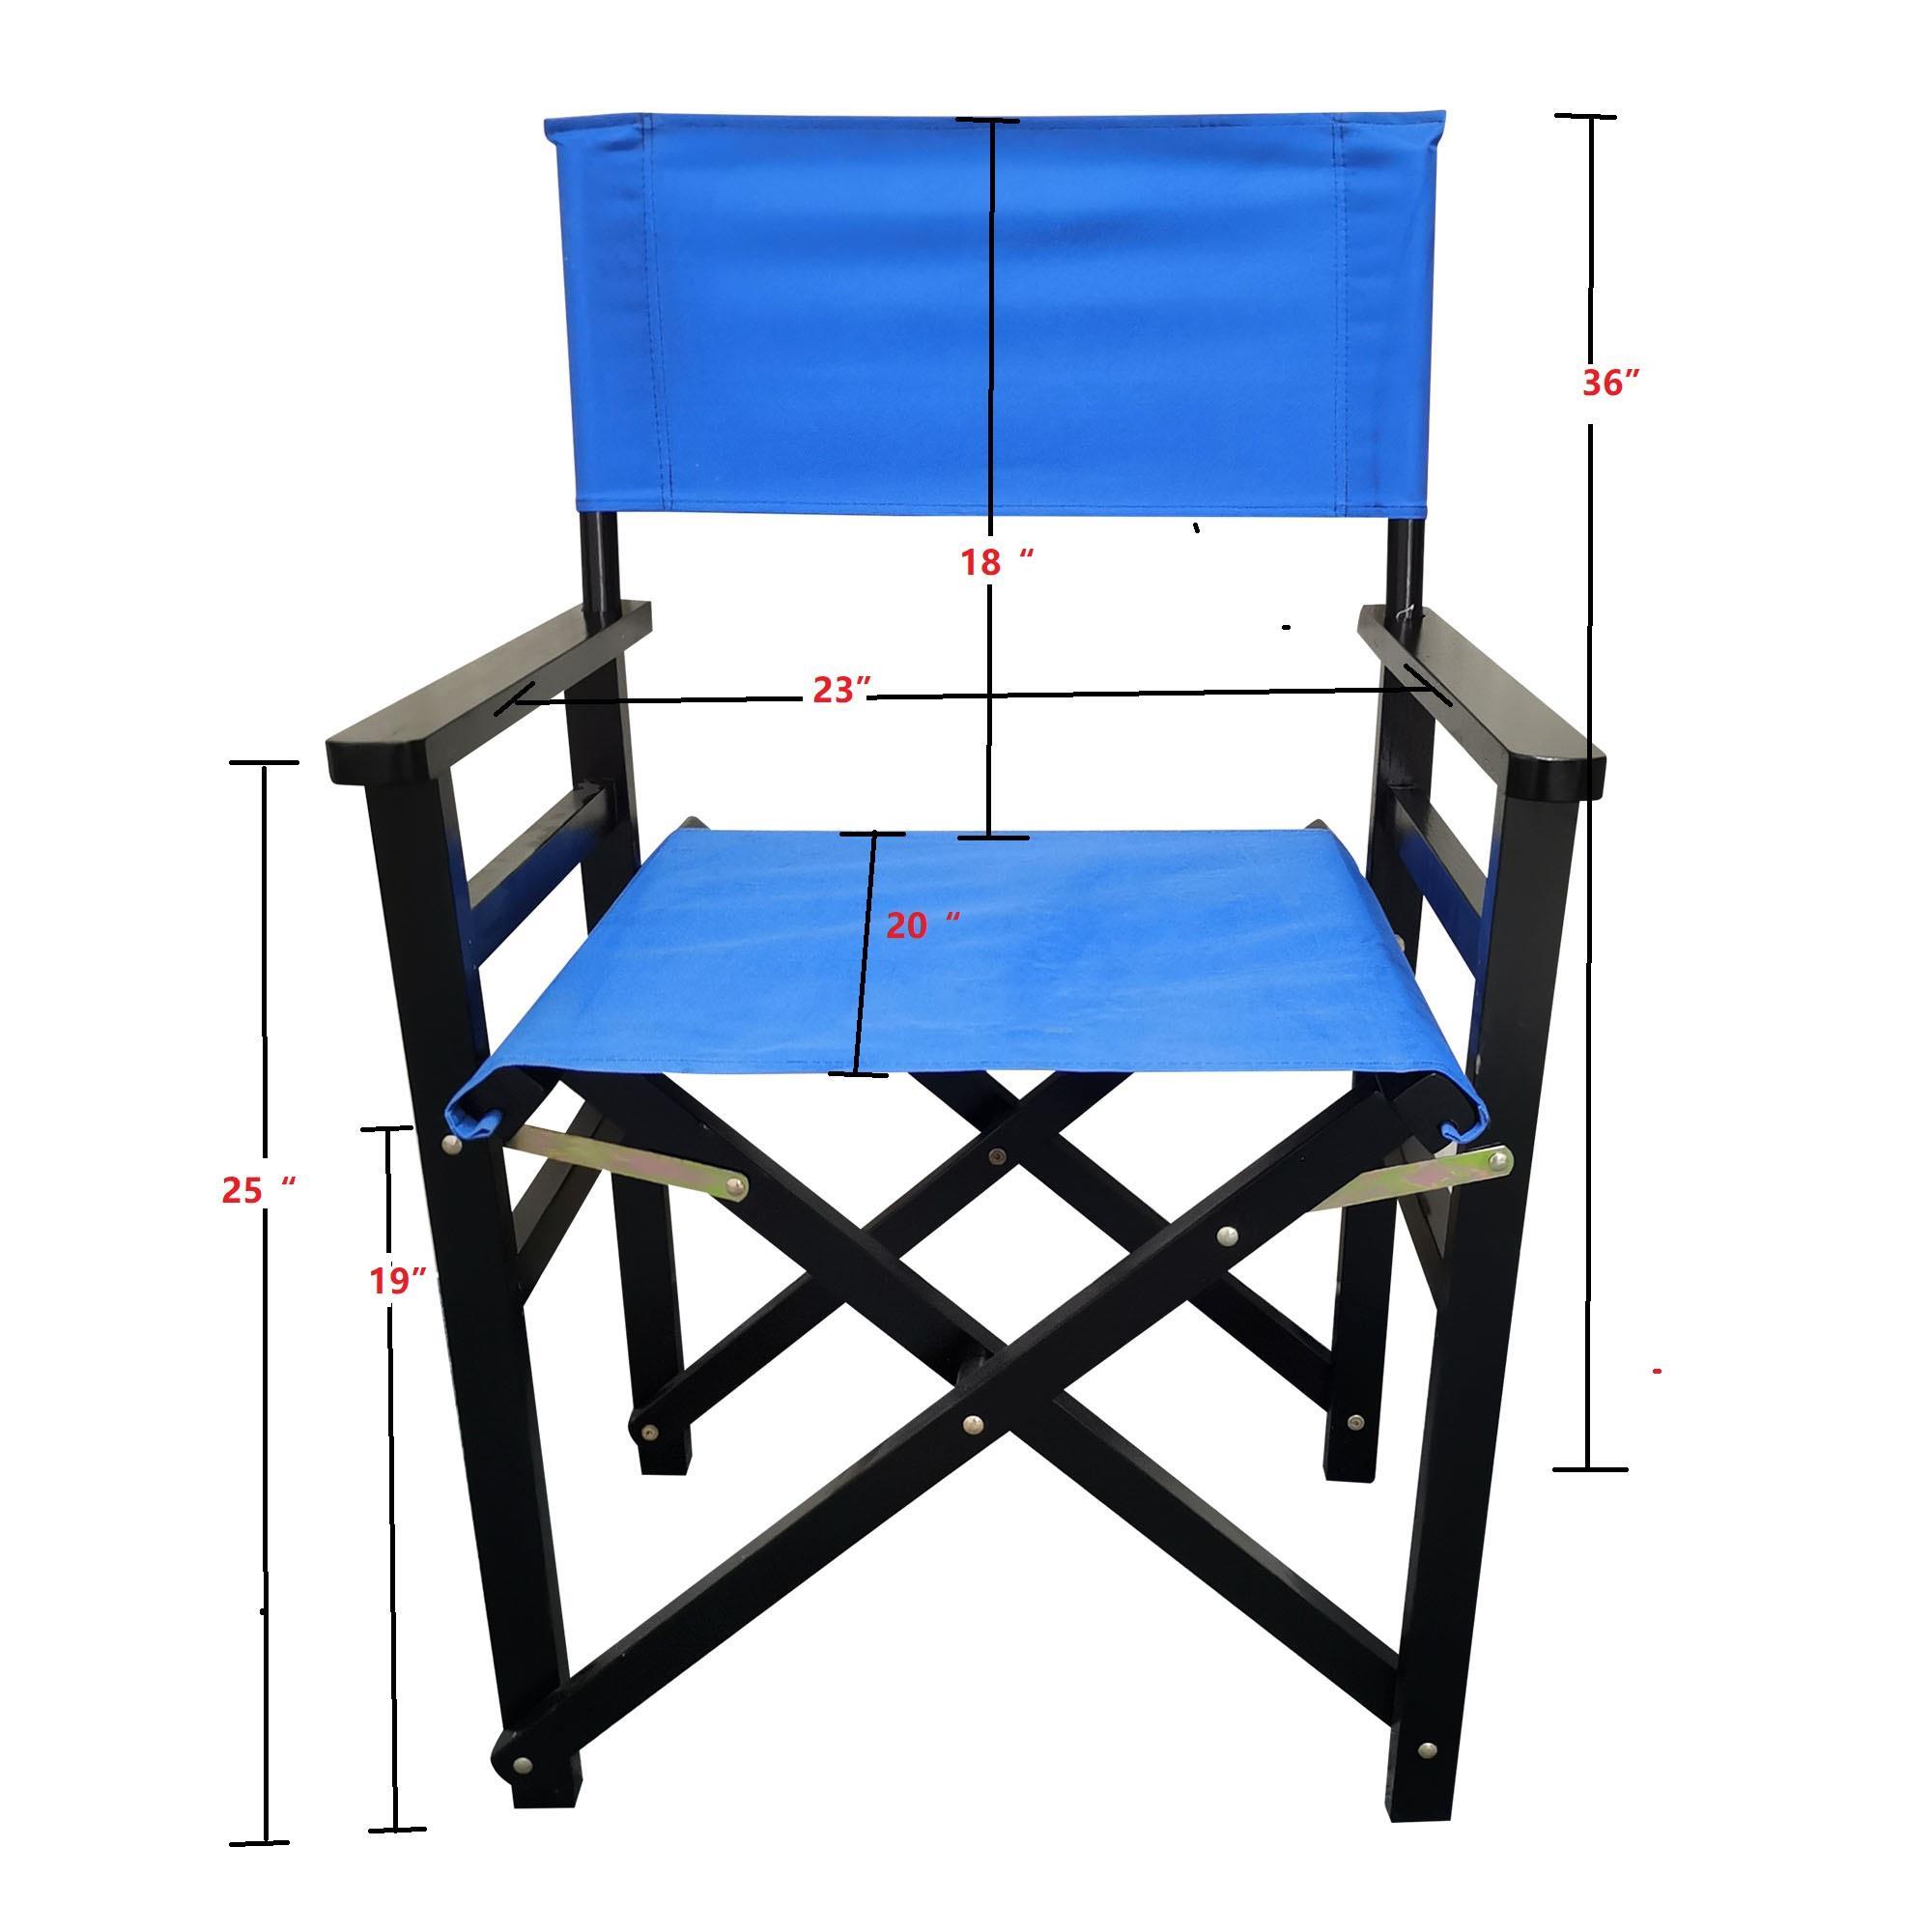 UBesGoo 2 Piece Folding Chair Wooden Director Chair Canvas, Casual Directors Chair, Black Frame-with Blue Canvas - image 3 of 11